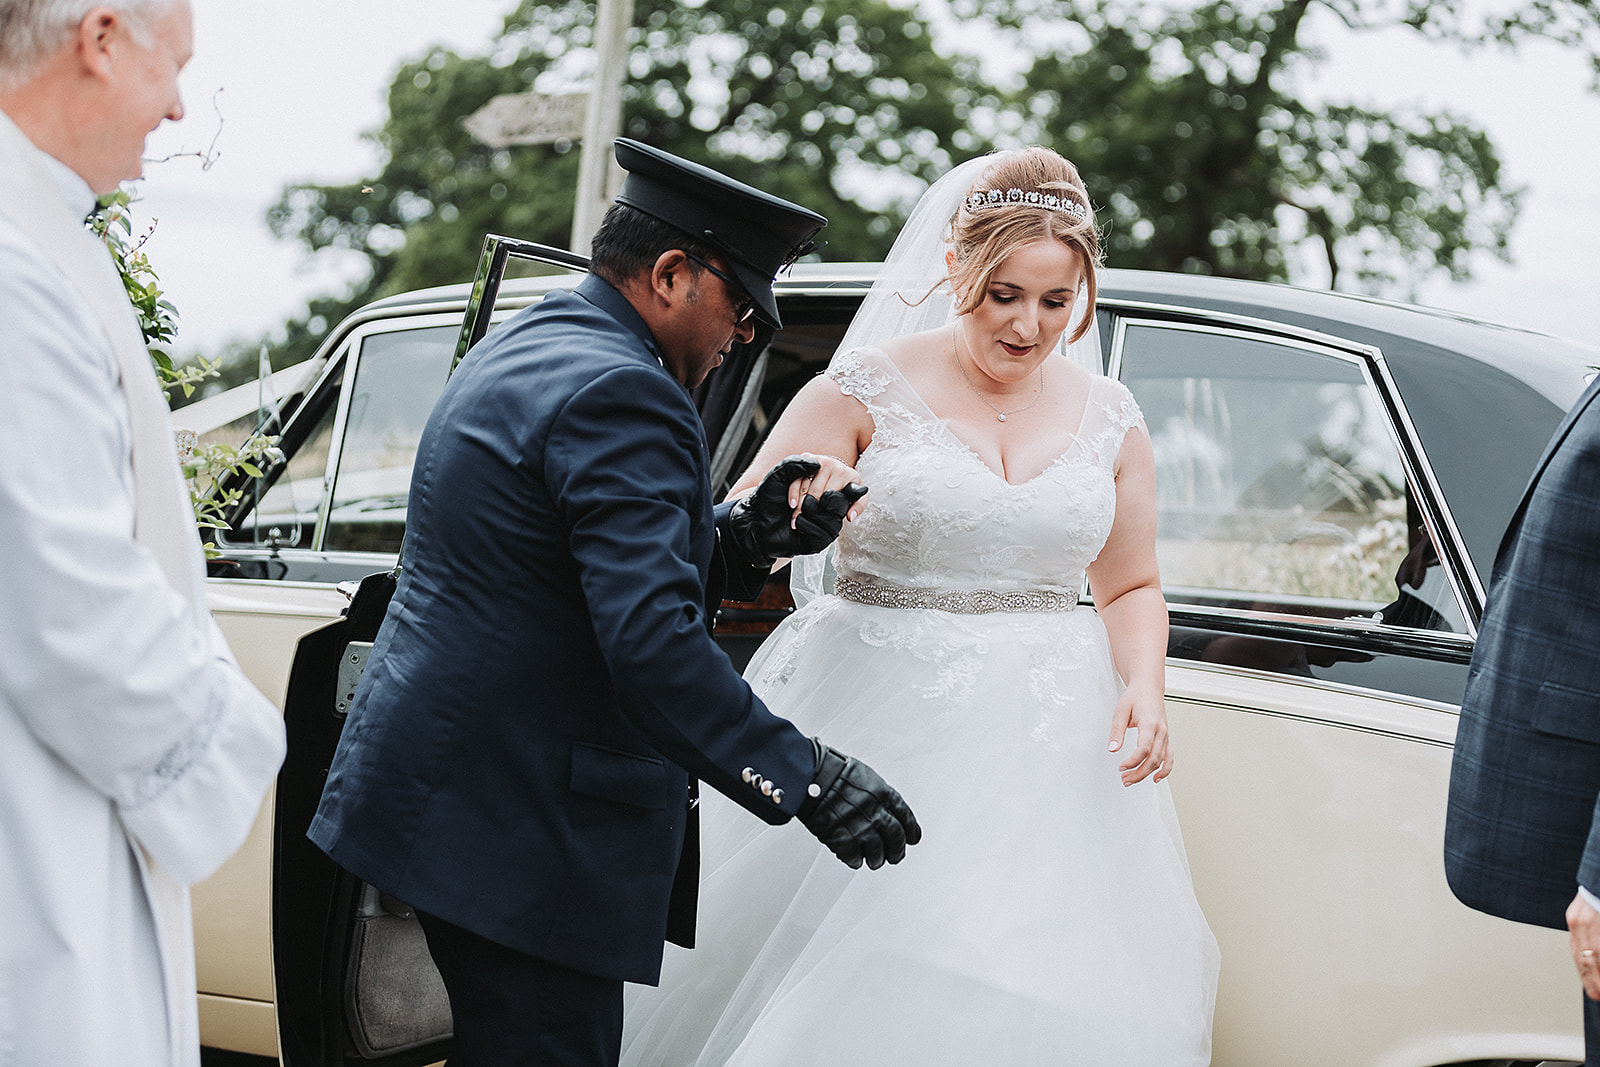 Bride getting out of her wedding car in her dress. Wedding Photo by Perfect Memories Photography